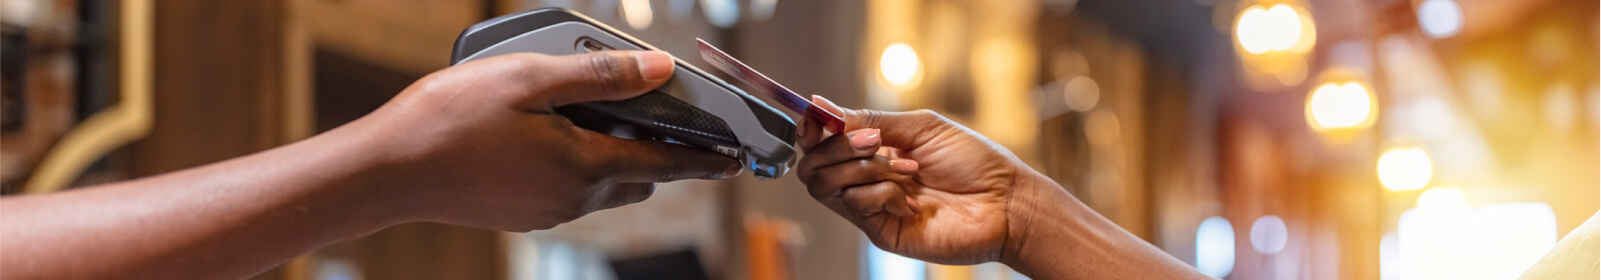 a person paying with a debit or credit card